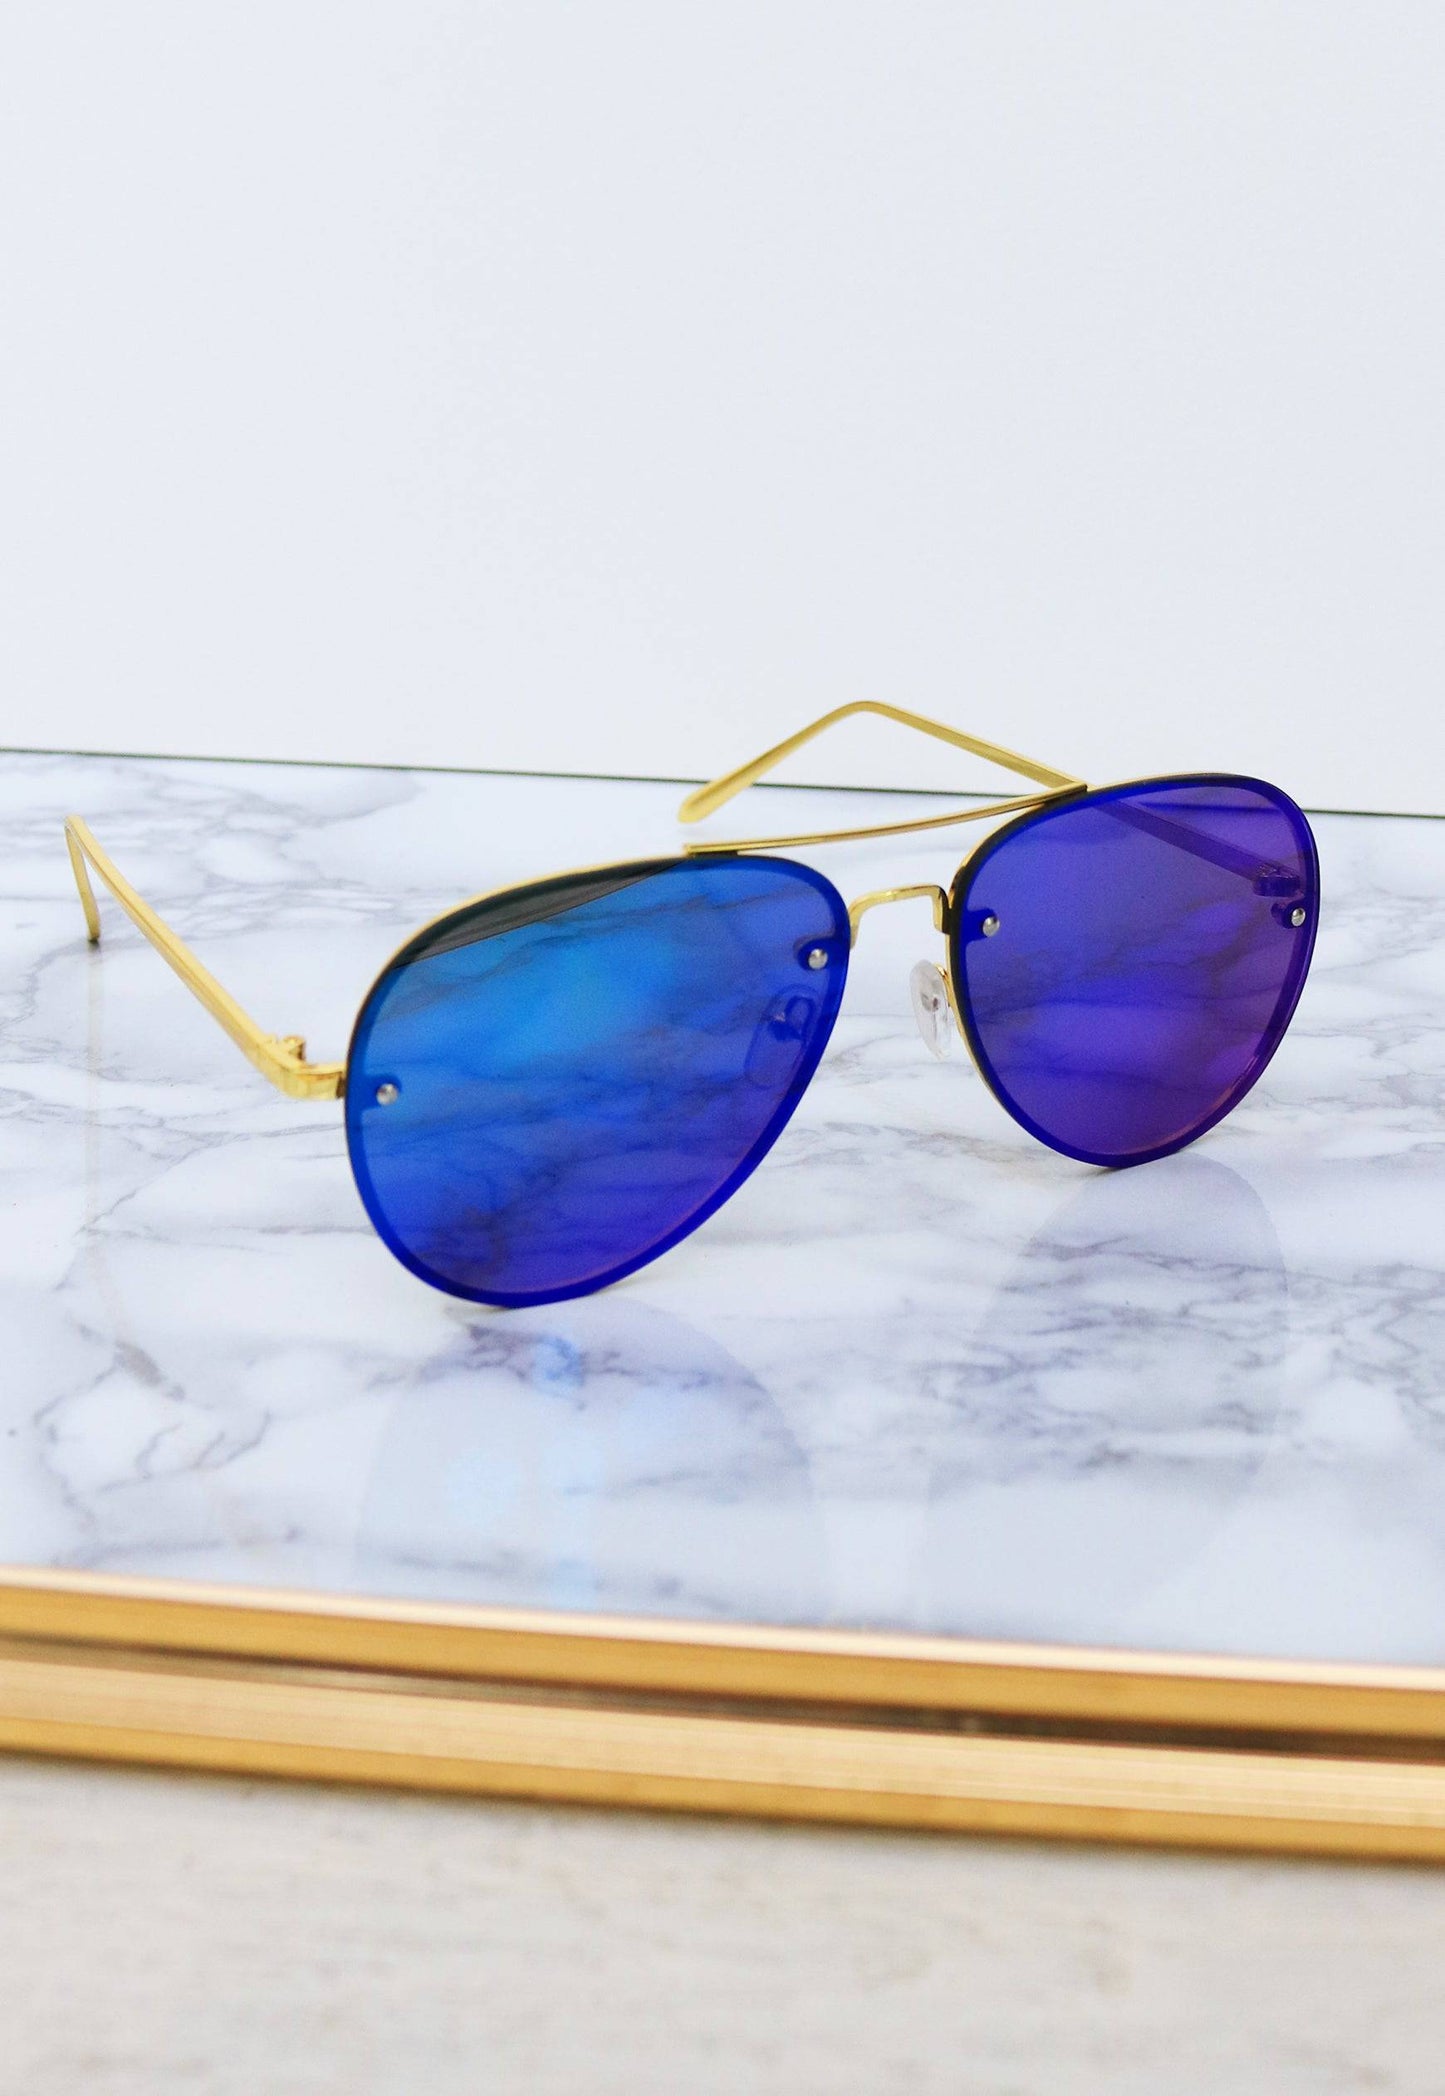 Lana Metal Rim Mirrored Lens Oversized Aviator Sunglasses in Blue with Gold Frame - One Nation Clothing